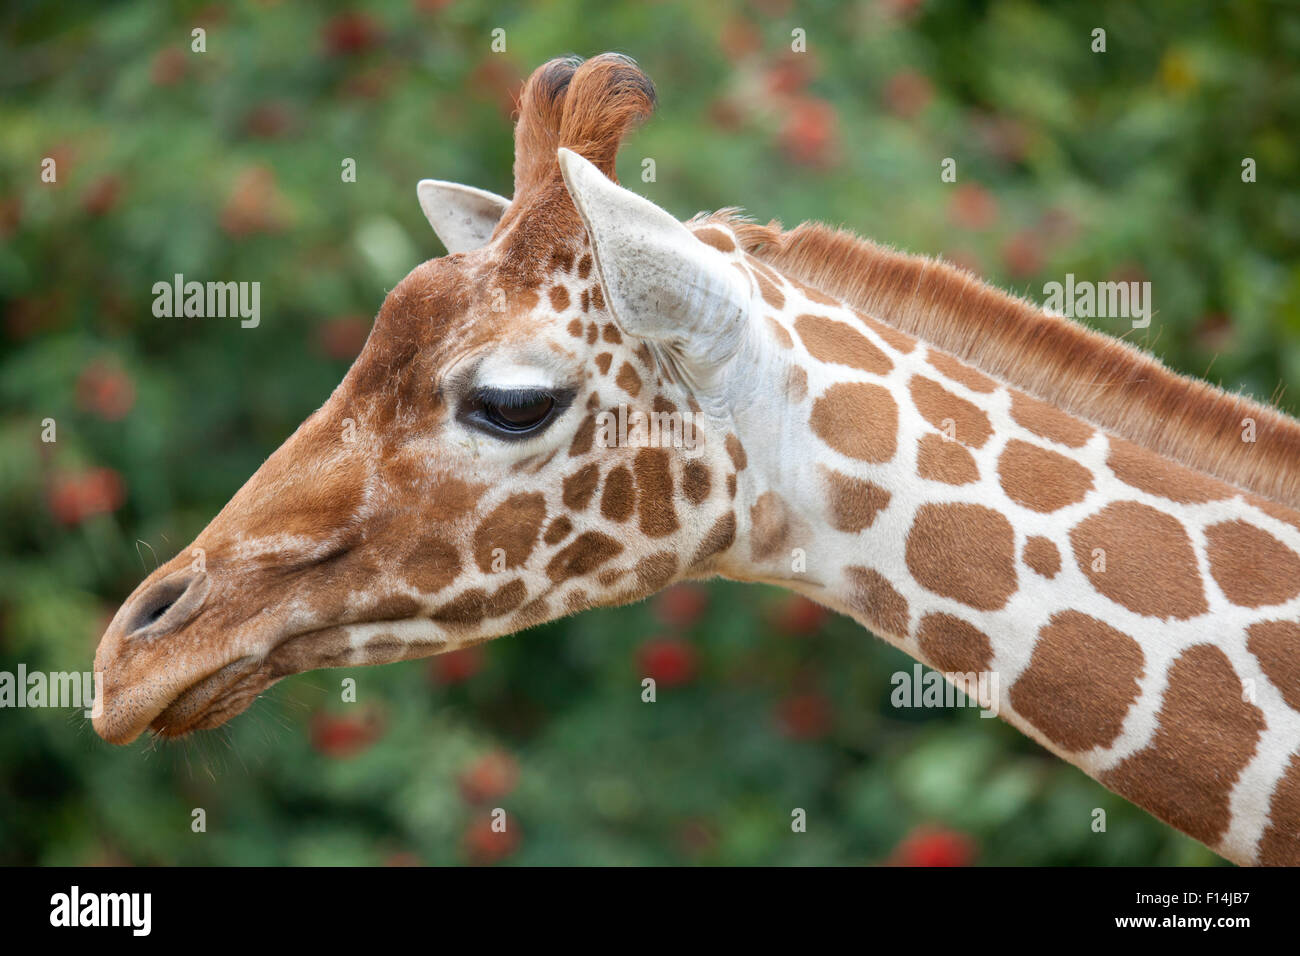 A side profile view of a young Reticulated Giraffe head Stock Photo